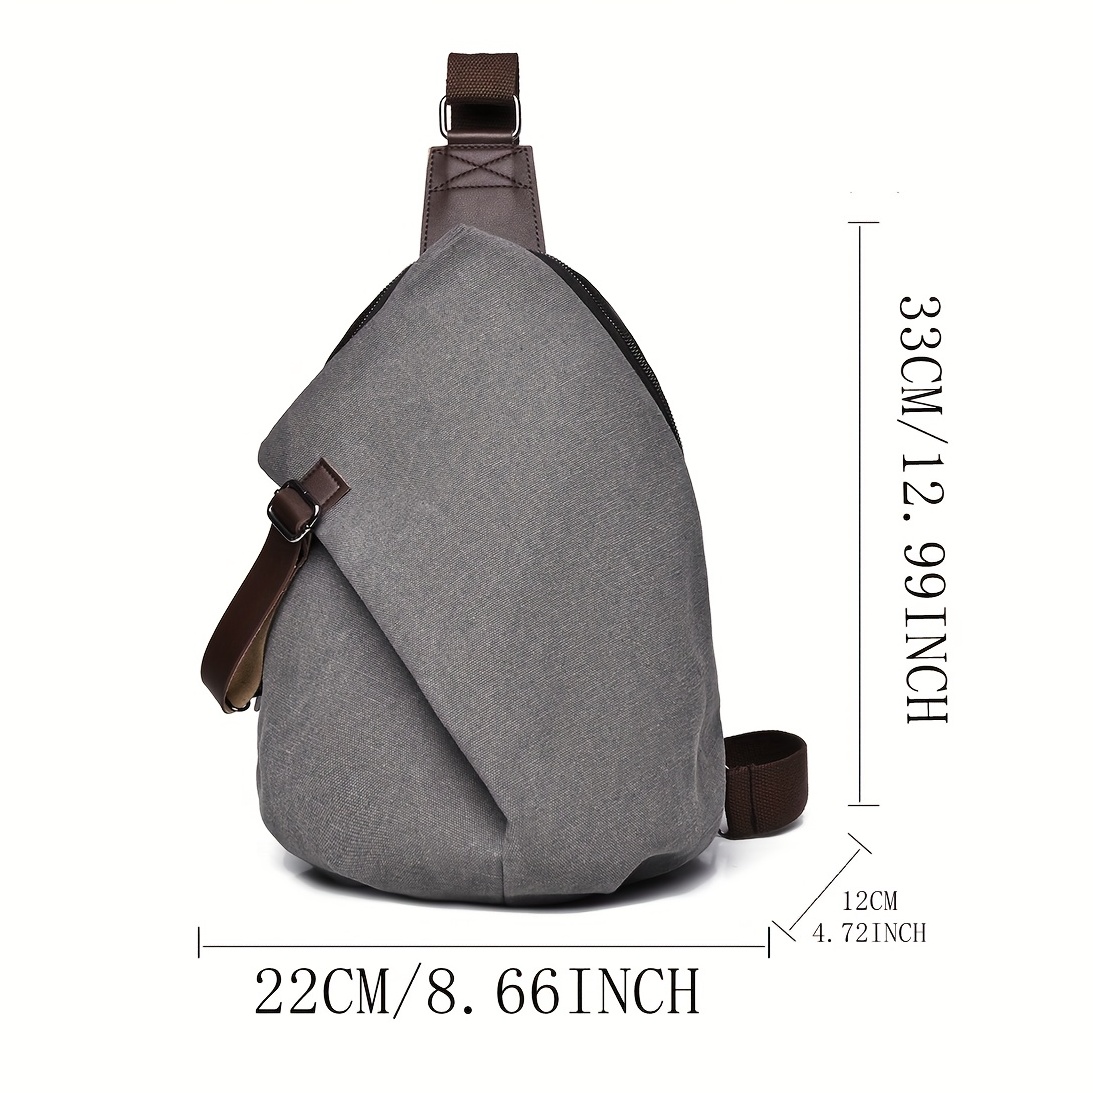 mens new canvas messenger bag large capacity chest bag multifunctional trendy messenger bag casual shoulder bag for outdoor sports hiking running travel daily commute